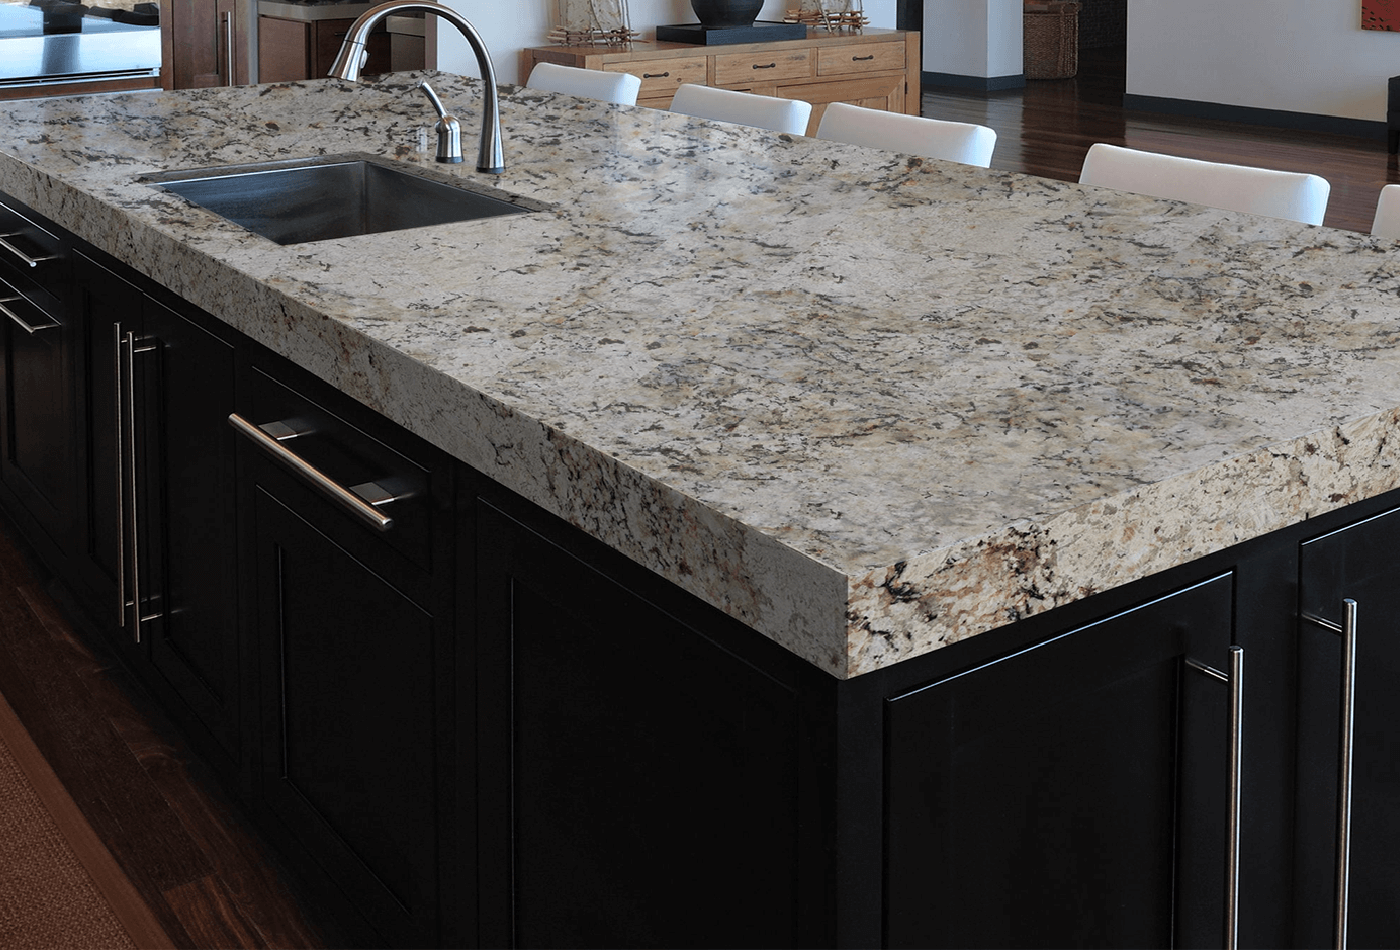 Snow Fall Granite, Style Your Kitchen With This Stone